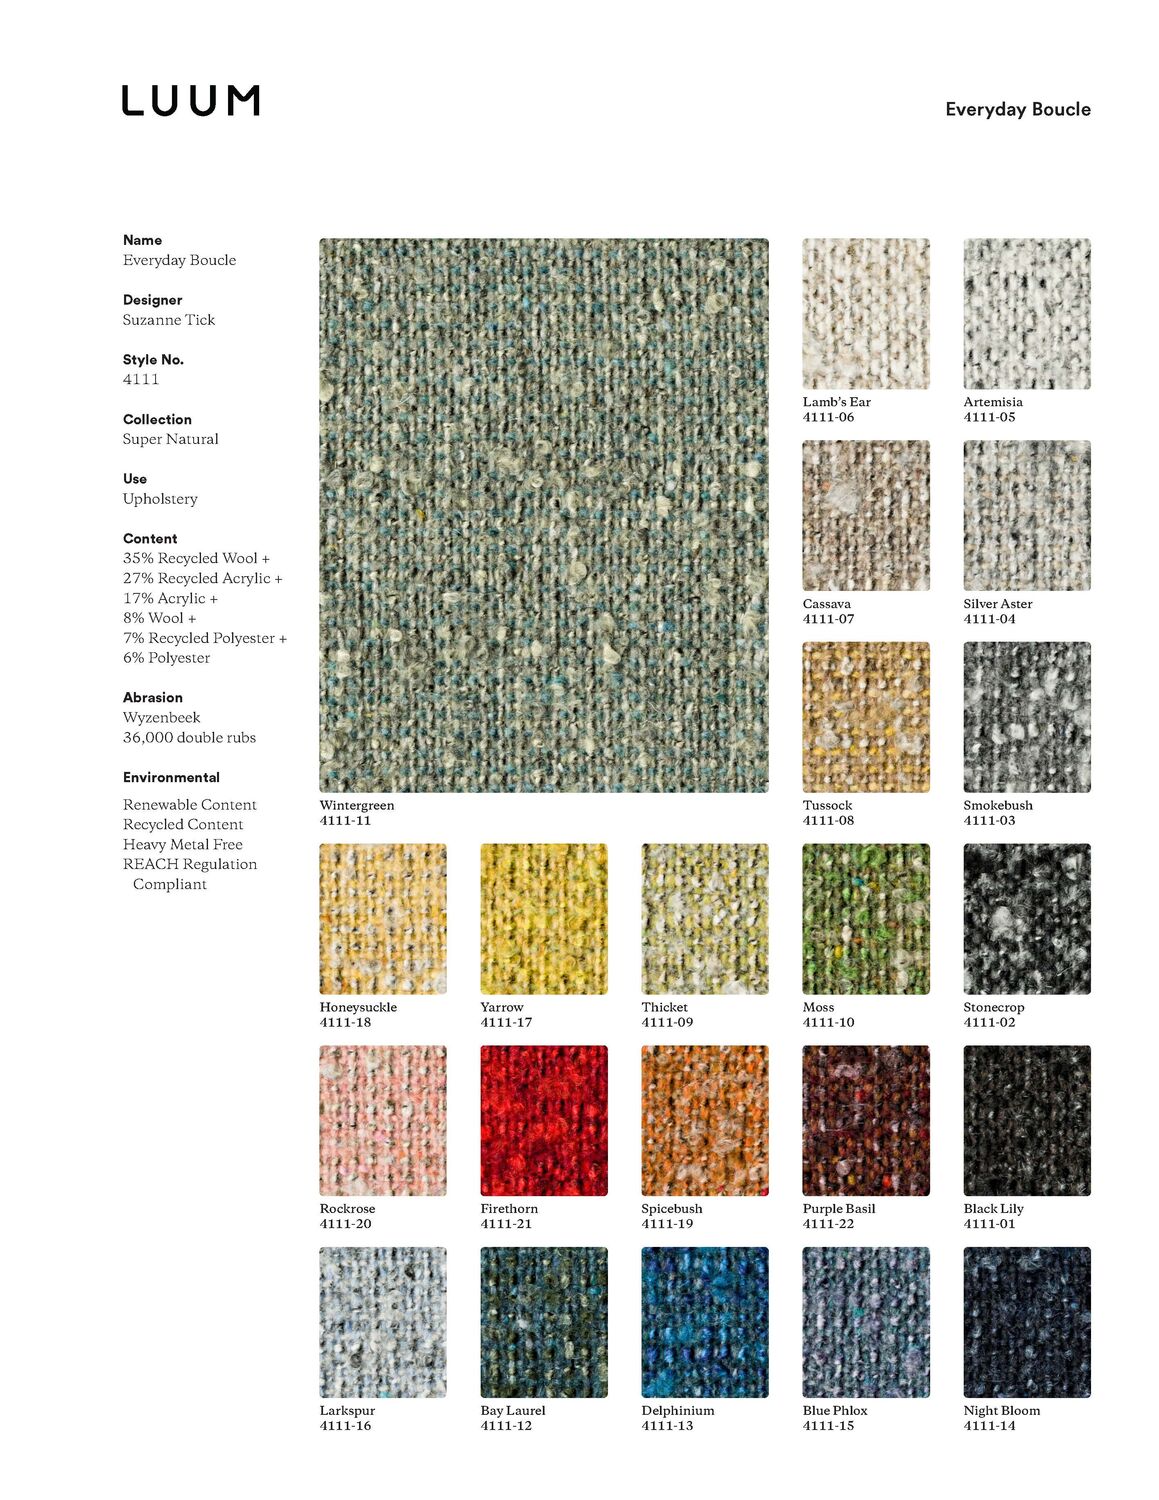 Everyday Boucle - 4111 Sample Card